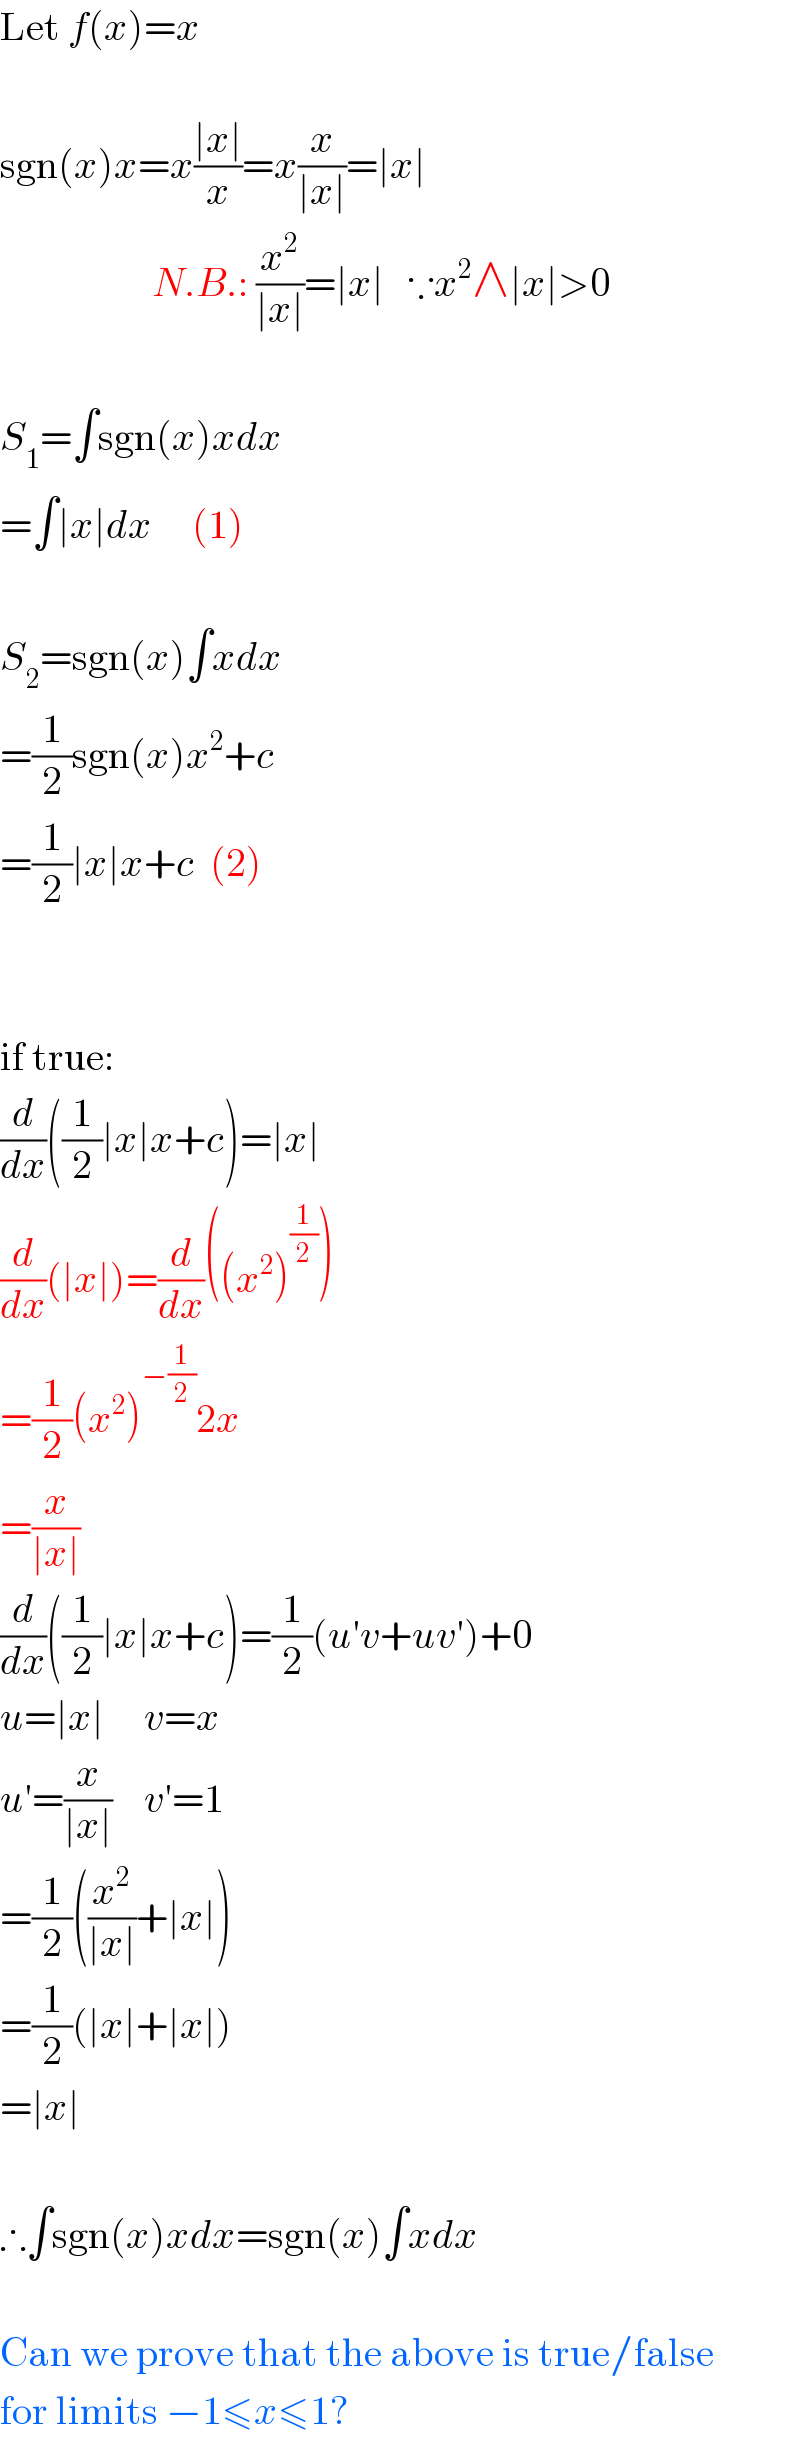 Let f(x)=x    sgn(x)x=x((∣x∣)/x)=x(x/(∣x∣))=∣x∣                     N.B.: (x^2 /(∣x∣))=∣x∣   ∵x^2 ∧∣x∣>0    S_1 =∫sgn(x)xdx  =∫∣x∣dx     (1)    S_2 =sgn(x)∫xdx  =(1/2)sgn(x)x^2 +c  =(1/2)∣x∣x+c  (2)      if true:  (d/dx)((1/2)∣x∣x+c)=∣x∣  (d/dx)(∣x∣)=(d/dx)((x^2 )^(1/2) )  =(1/2)(x^2 )^(−(1/2)) 2x  =(x/(∣x∣))  (d/dx)((1/2)∣x∣x+c)=(1/2)(u′v+uv′)+0  u=∣x∣     v=x  u′=(x/(∣x∣))    v′=1  =(1/2)((x^2 /(∣x∣))+∣x∣)  =(1/2)(∣x∣+∣x∣)  =∣x∣    ∴∫sgn(x)xdx=sgn(x)∫xdx    Can we prove that the above is true/false  for limits −1≤x≤1?  